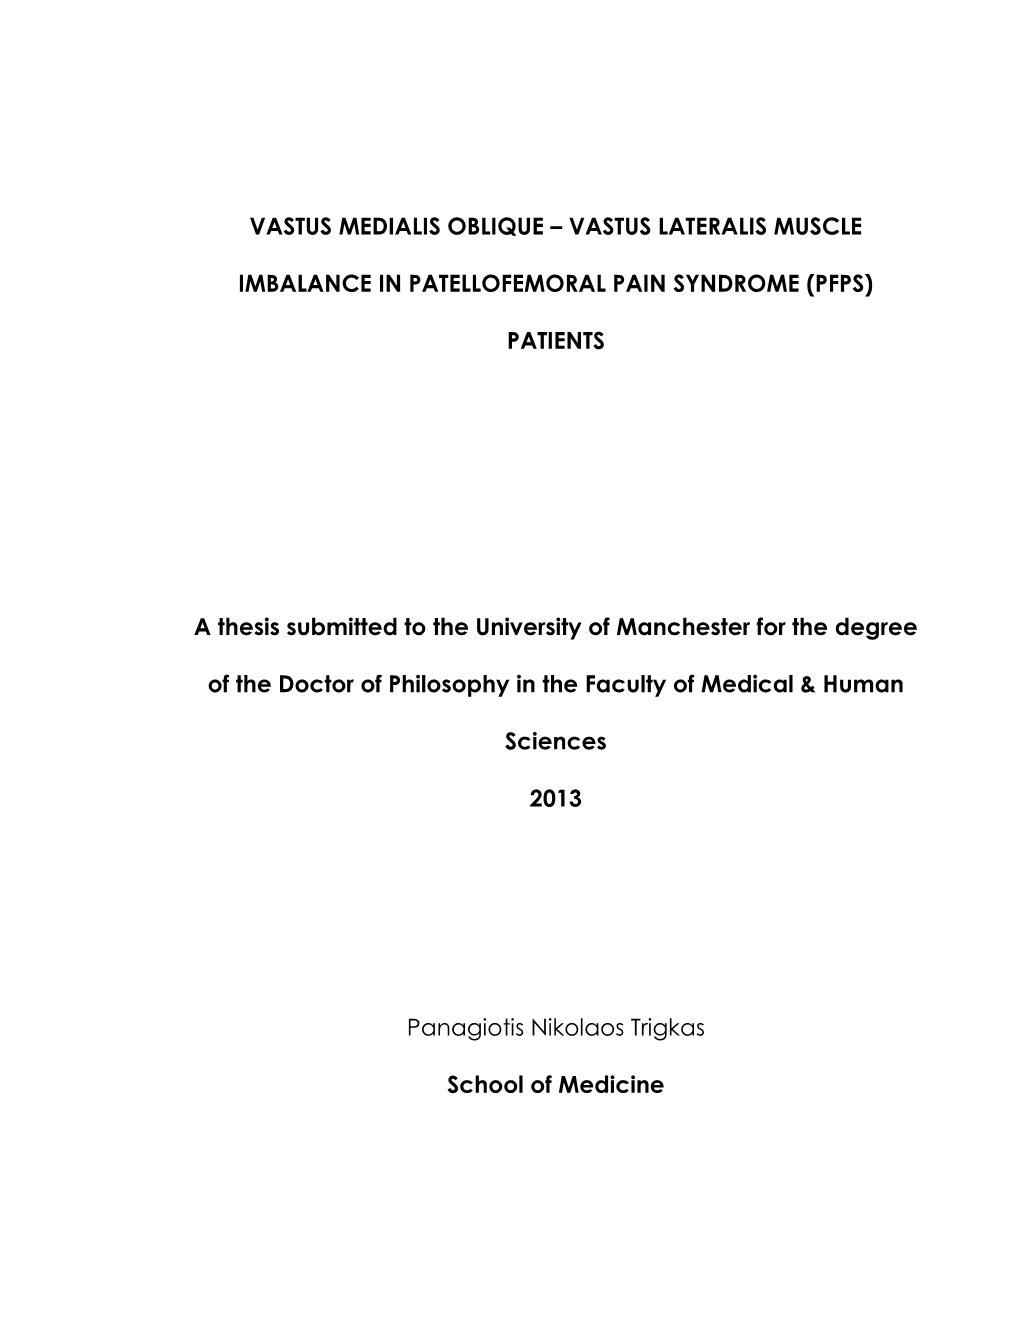 VASTUS LATERALIS MUSCLE IMBALANCE in PATELLOFEMORAL PAIN SYNDROME (PFPS) PATIENTS a Thesis Submitted